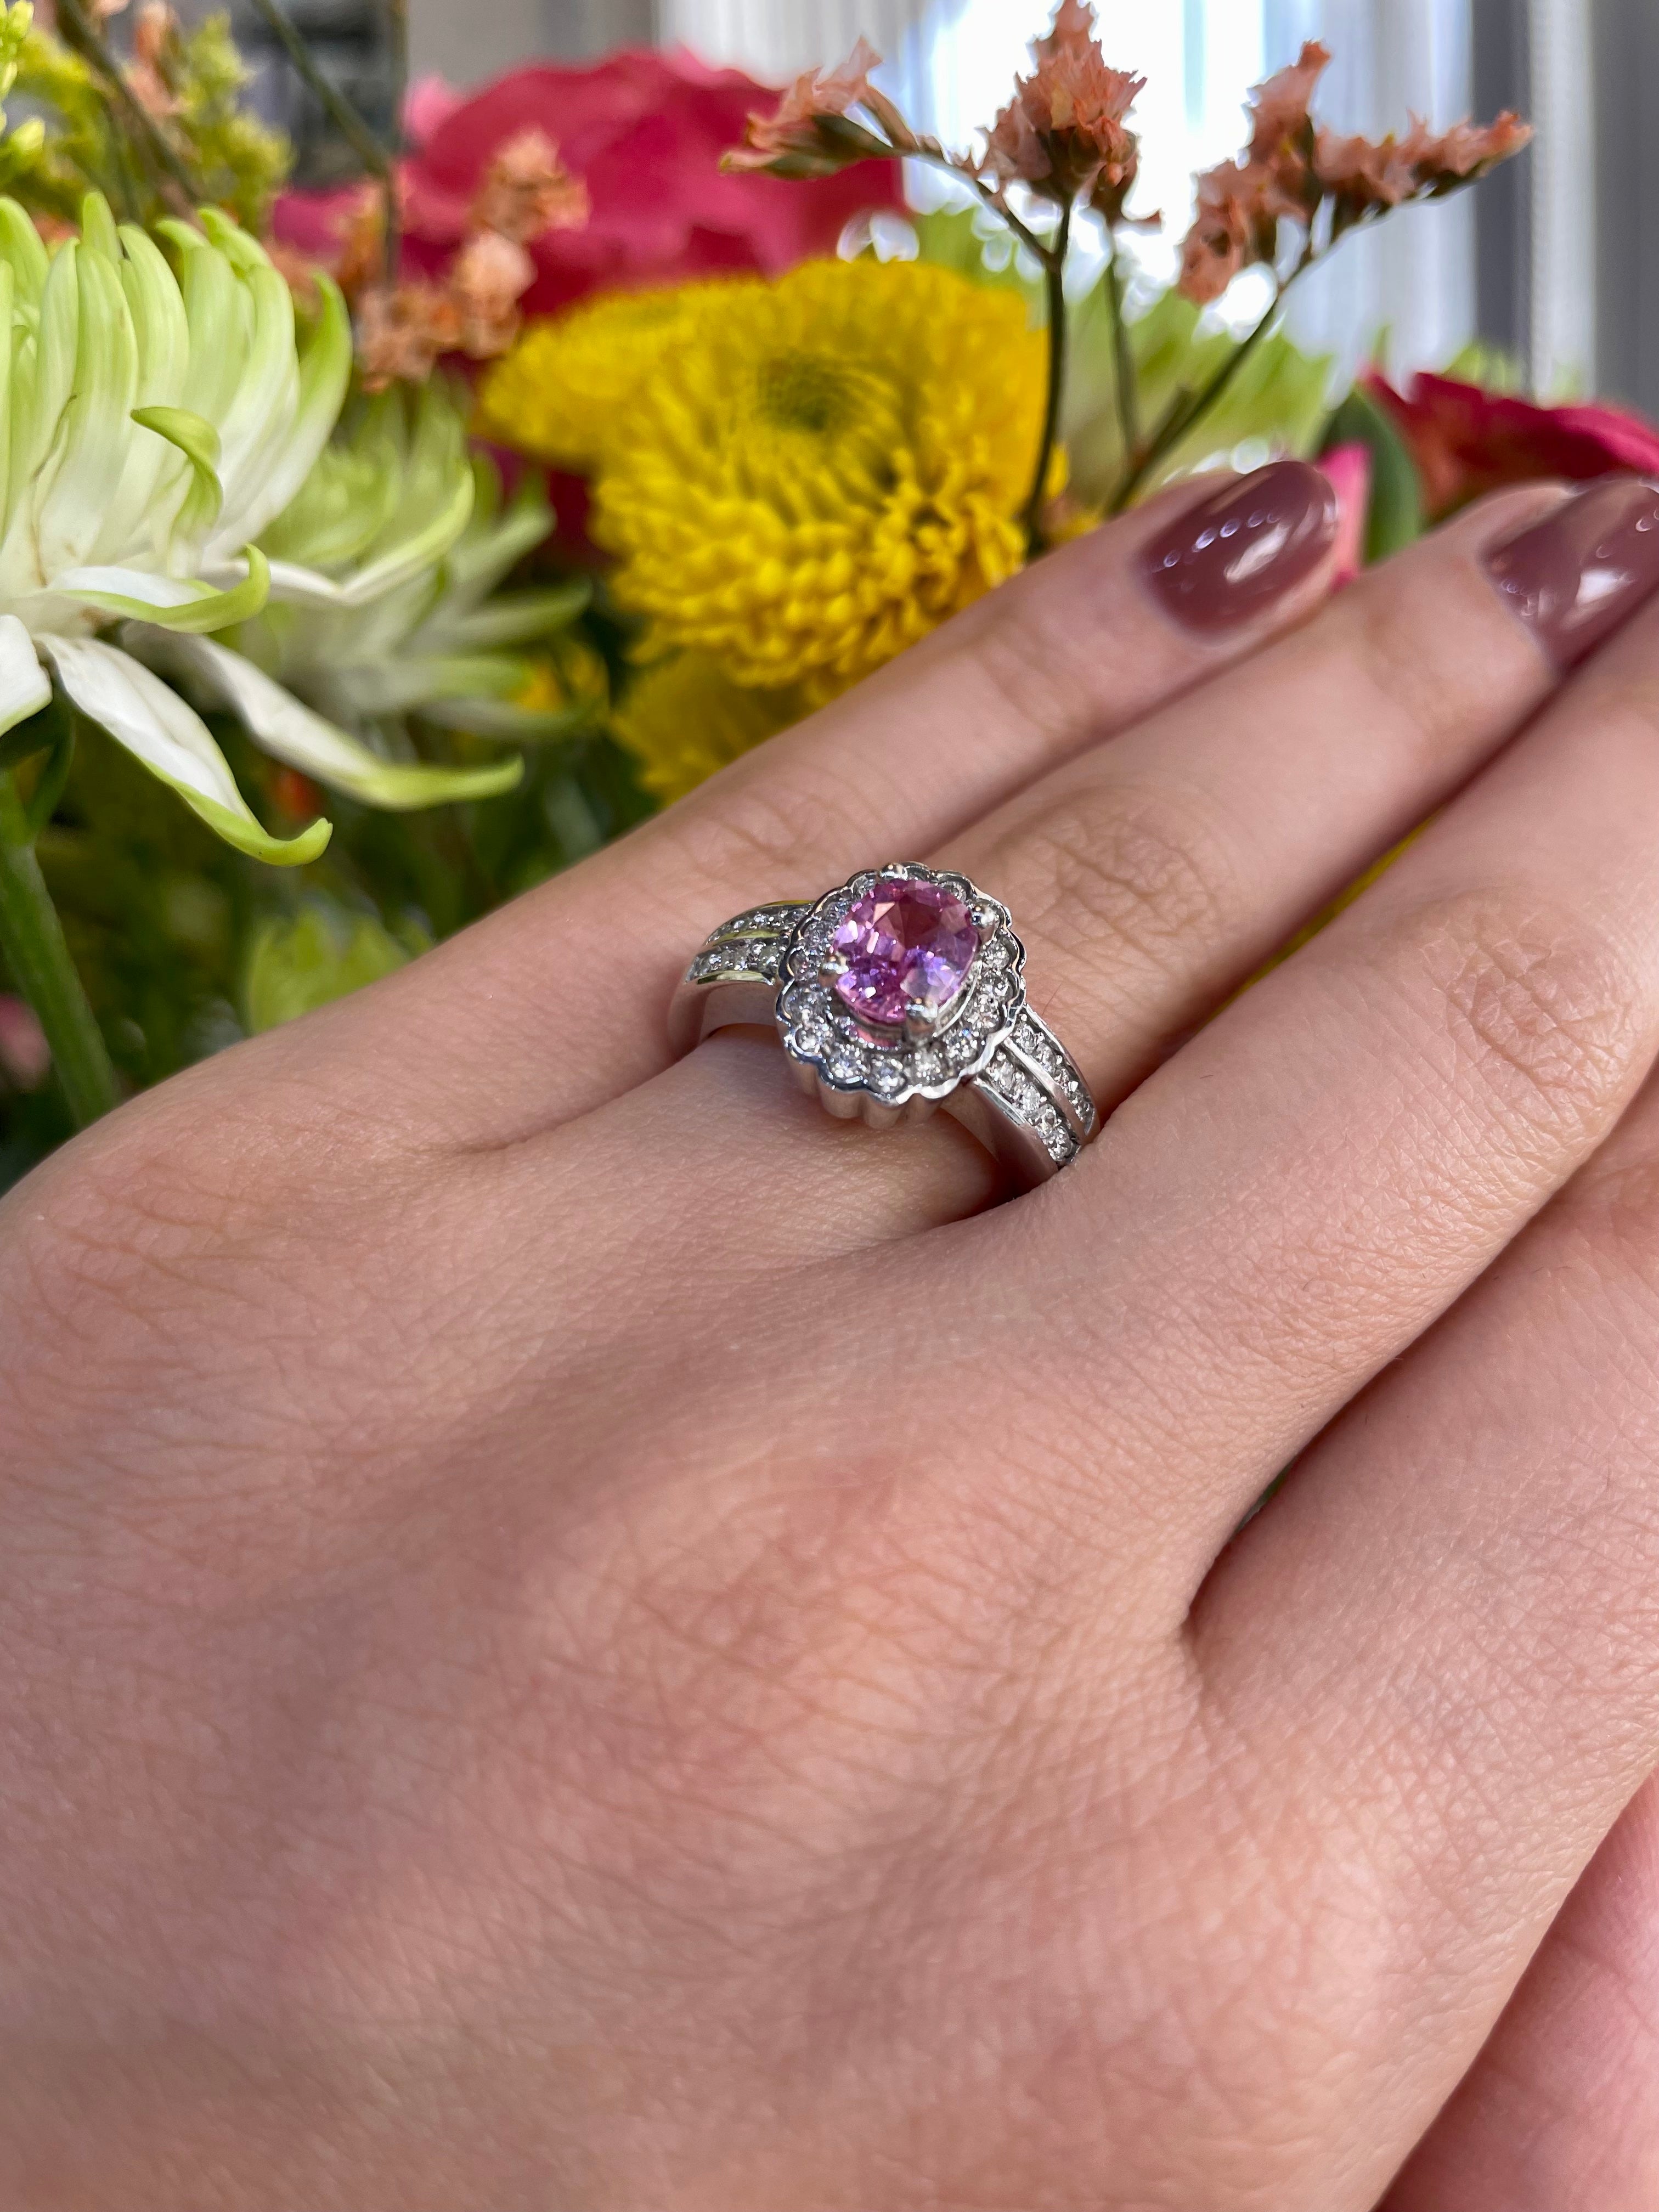 Pink Sapphire Rings With Diamonds